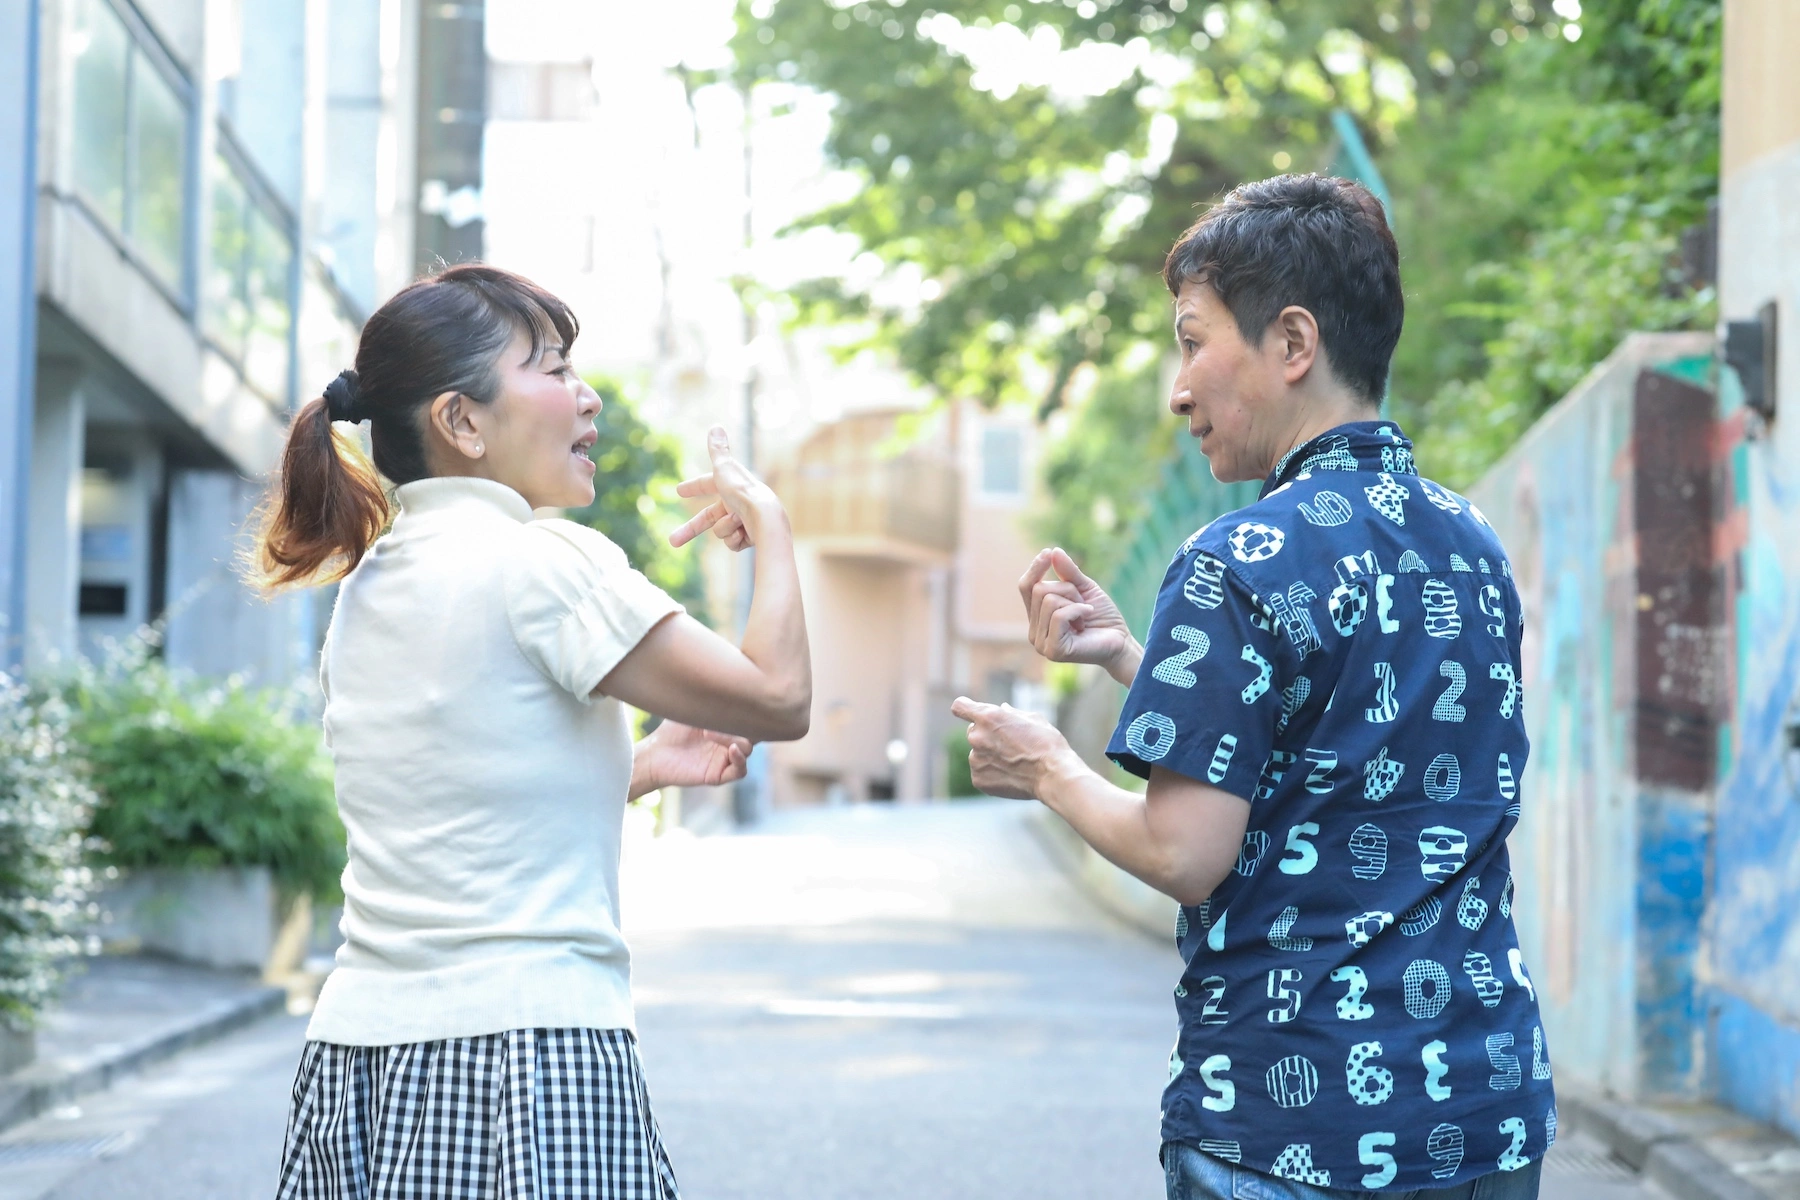 A middle age couple walks down an alley together in Japan communicating in sign language